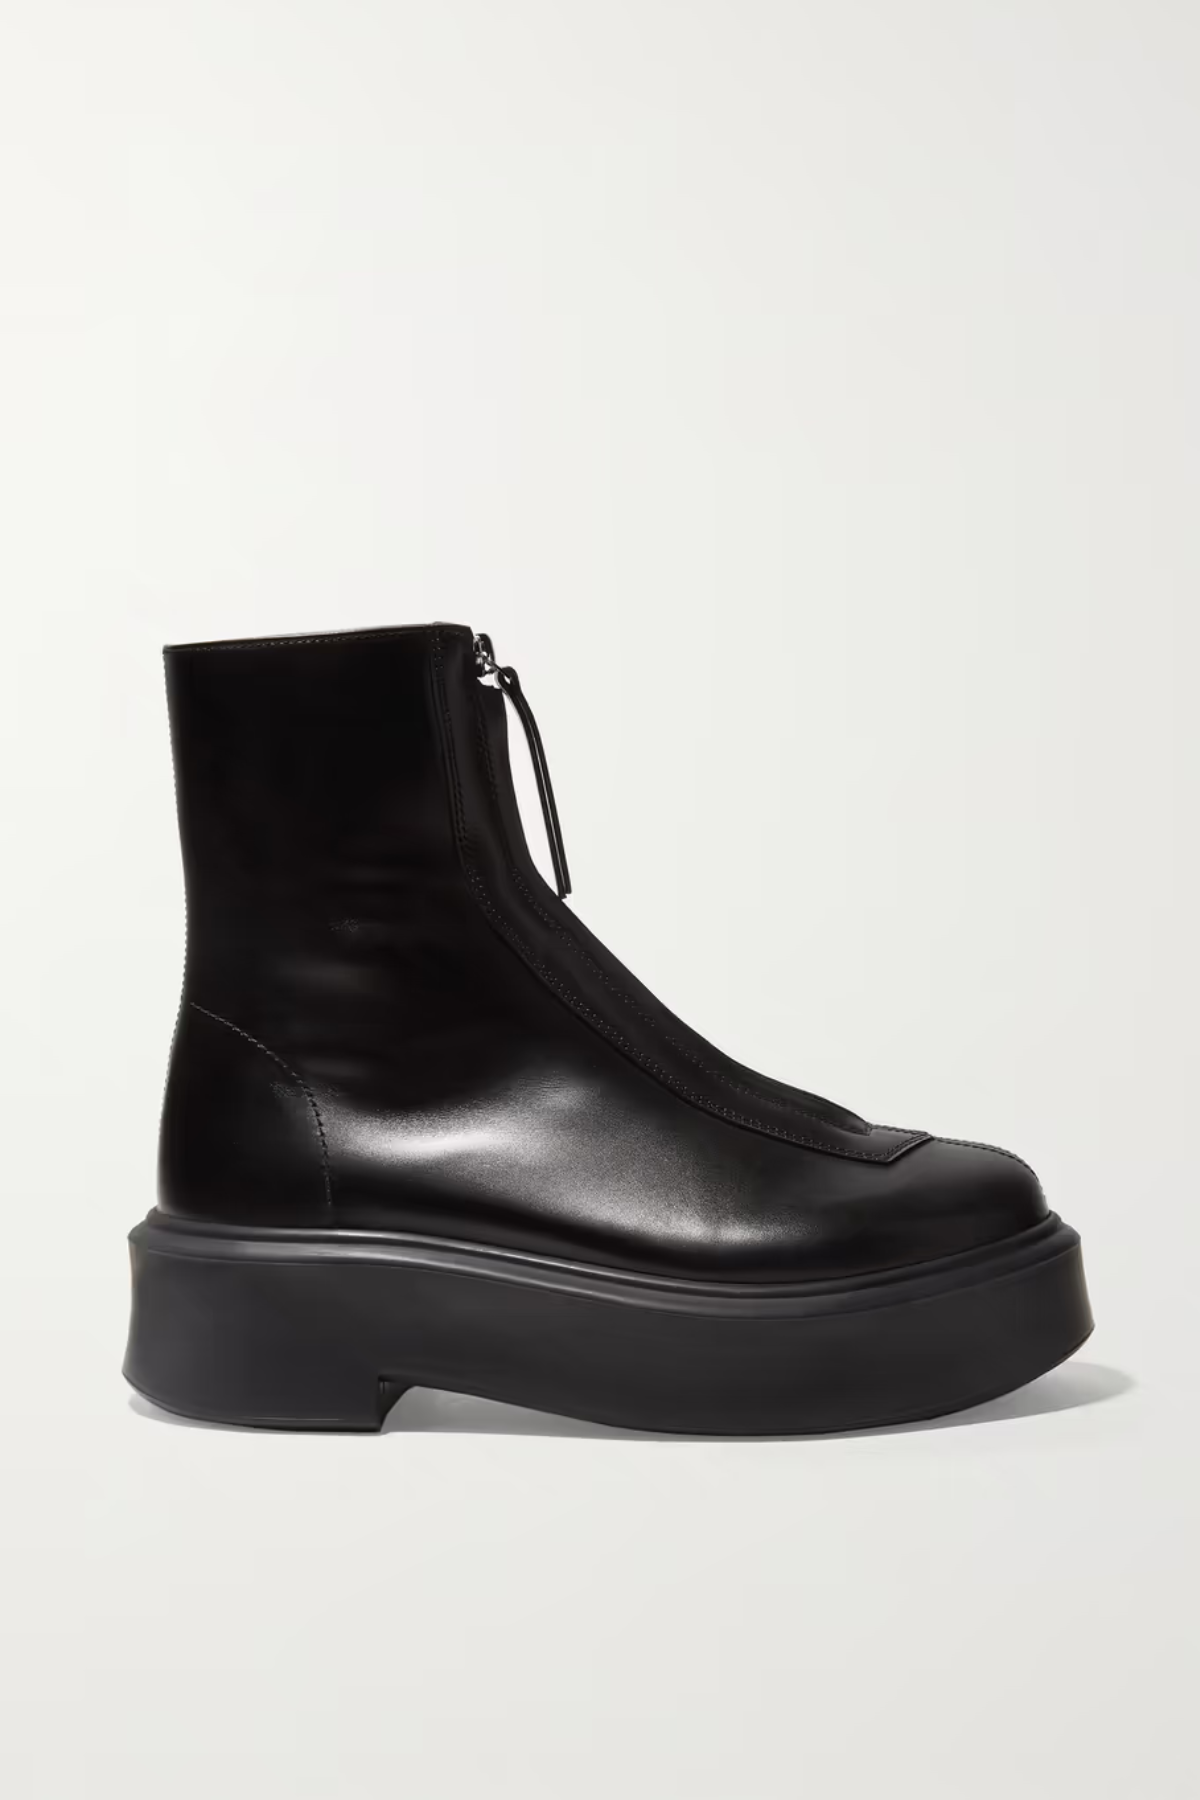 Types of Boots 2023 | The Row Leather Ankle Boots